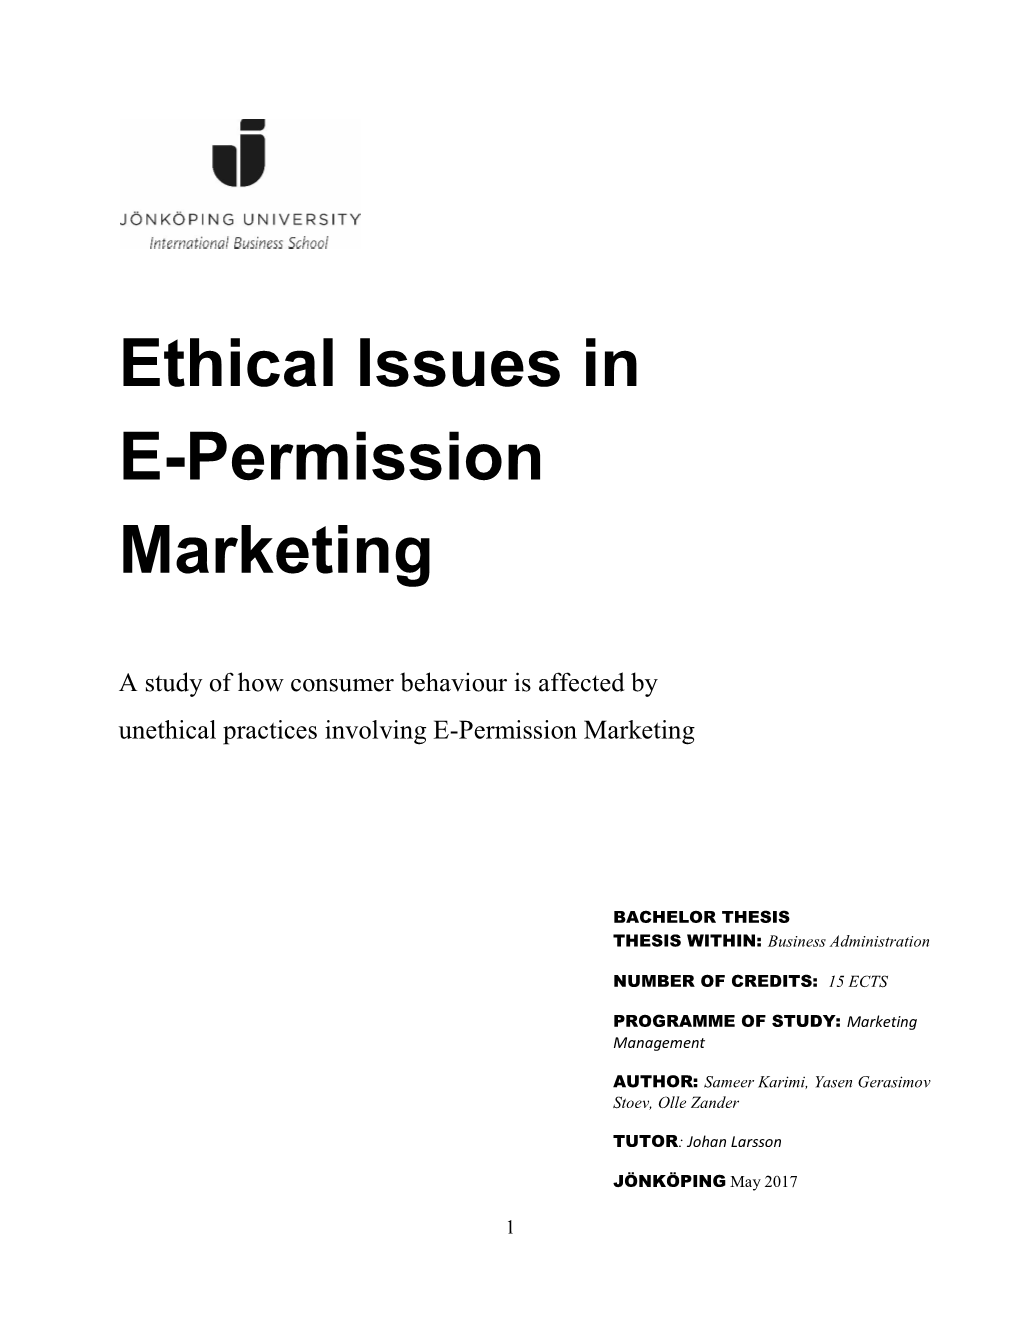 Ethical Issues in E-Permission Marketing